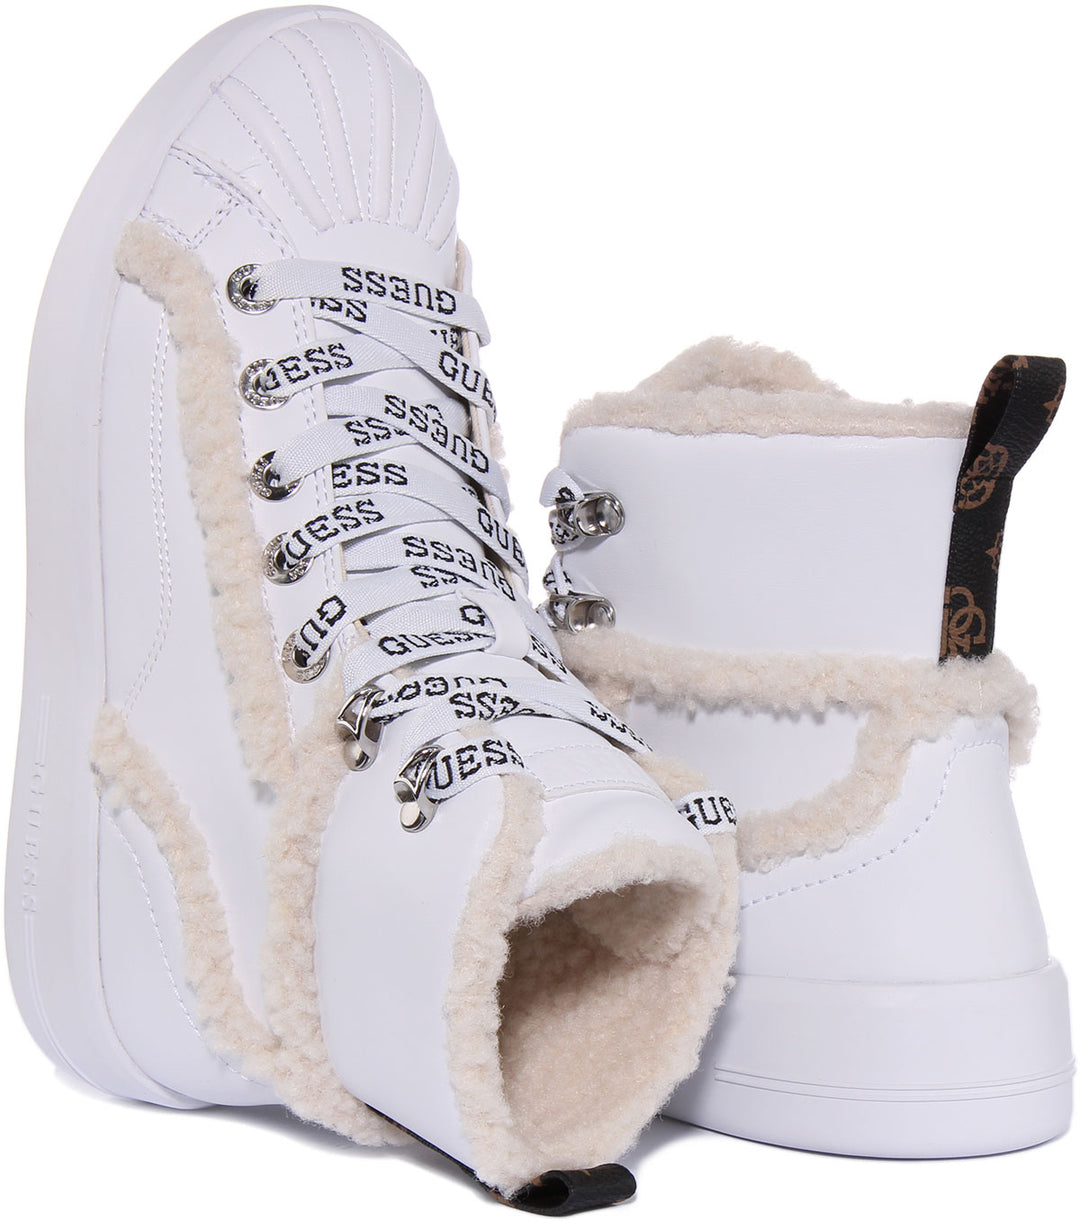 Guess Ramsi High Top In White For Women